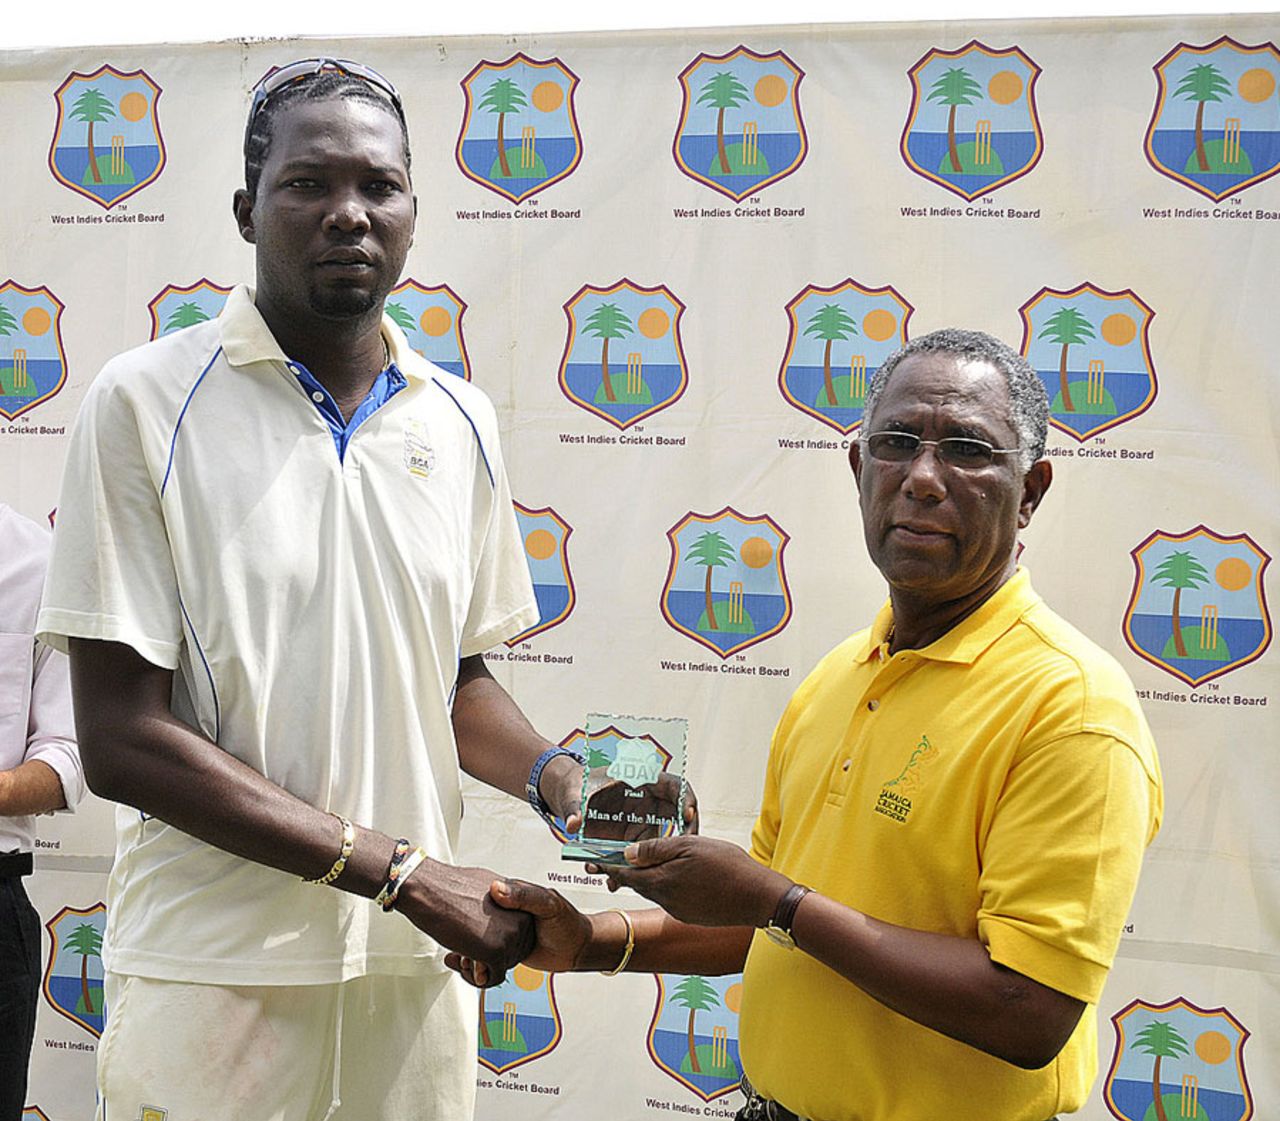 Sulieman Benn receives the Man of the Match award from Lyndel Wright, the president of the JCA, Jamaica v Barbados, Regional Four Day Competition, final, Sabina Park, 4th day, April 16, 2012